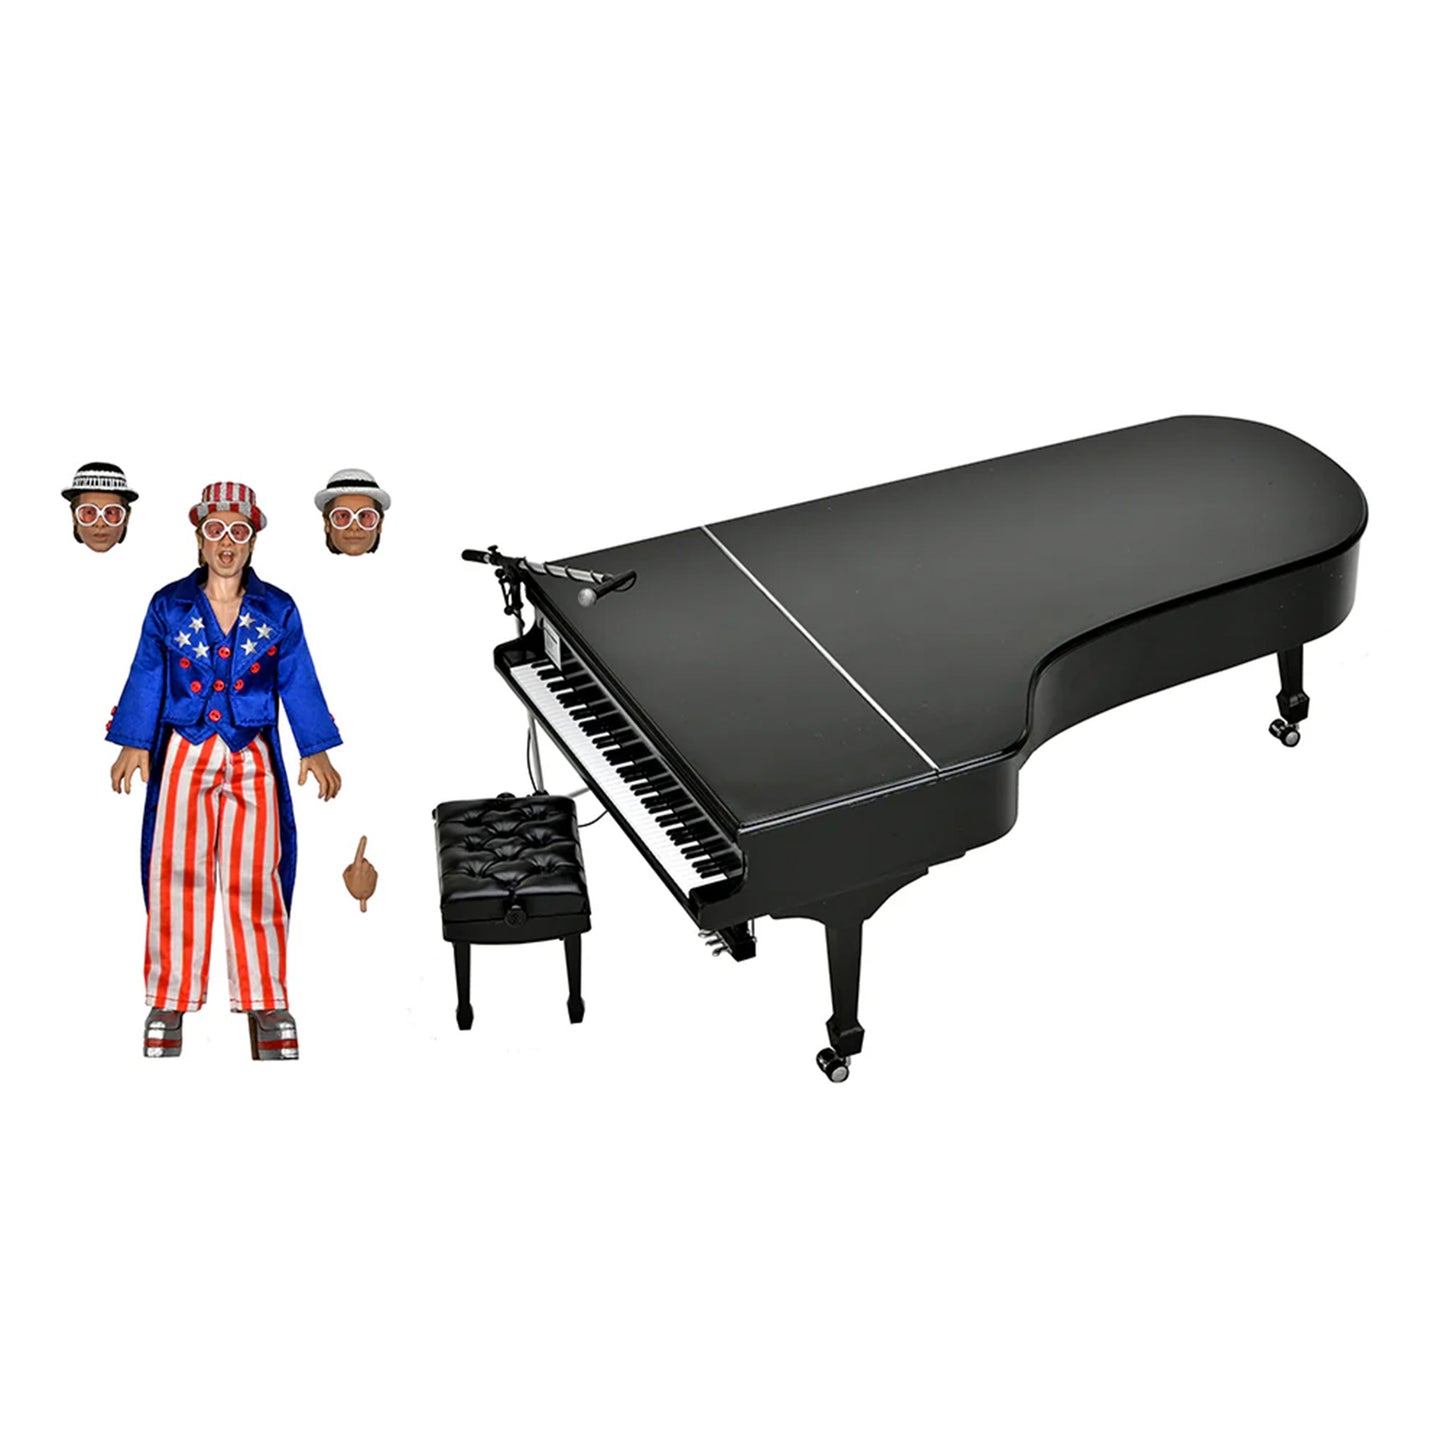 Elton John: Live in '76 8" Action Figure with Piano by NECA